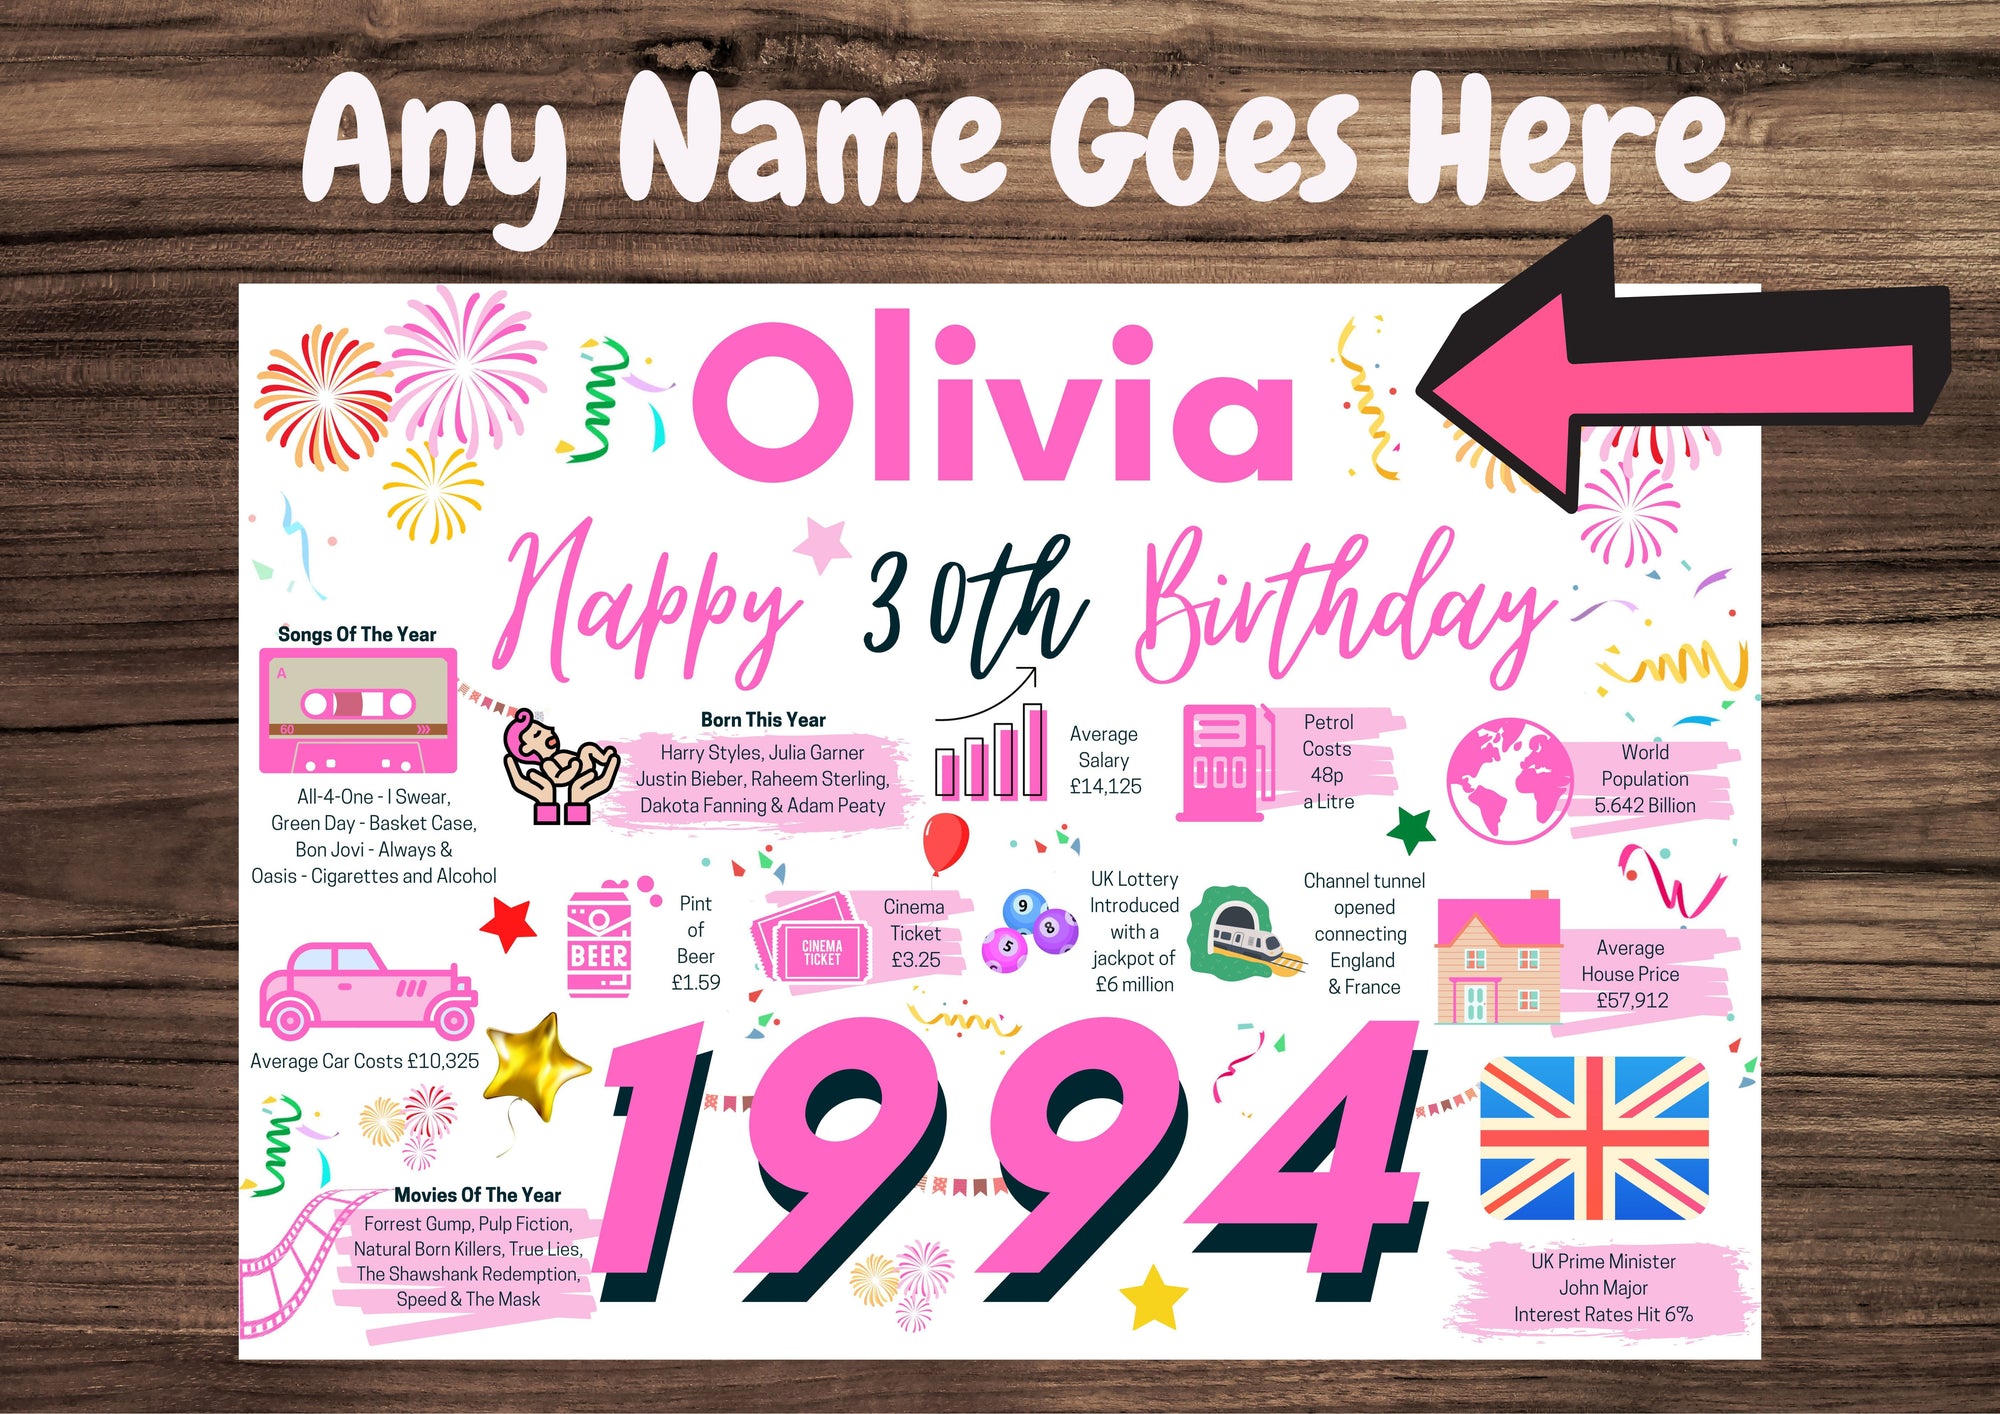 Personalised 30th Birthday Card, Enter Any Name, Born In 1994 Facts Milestones